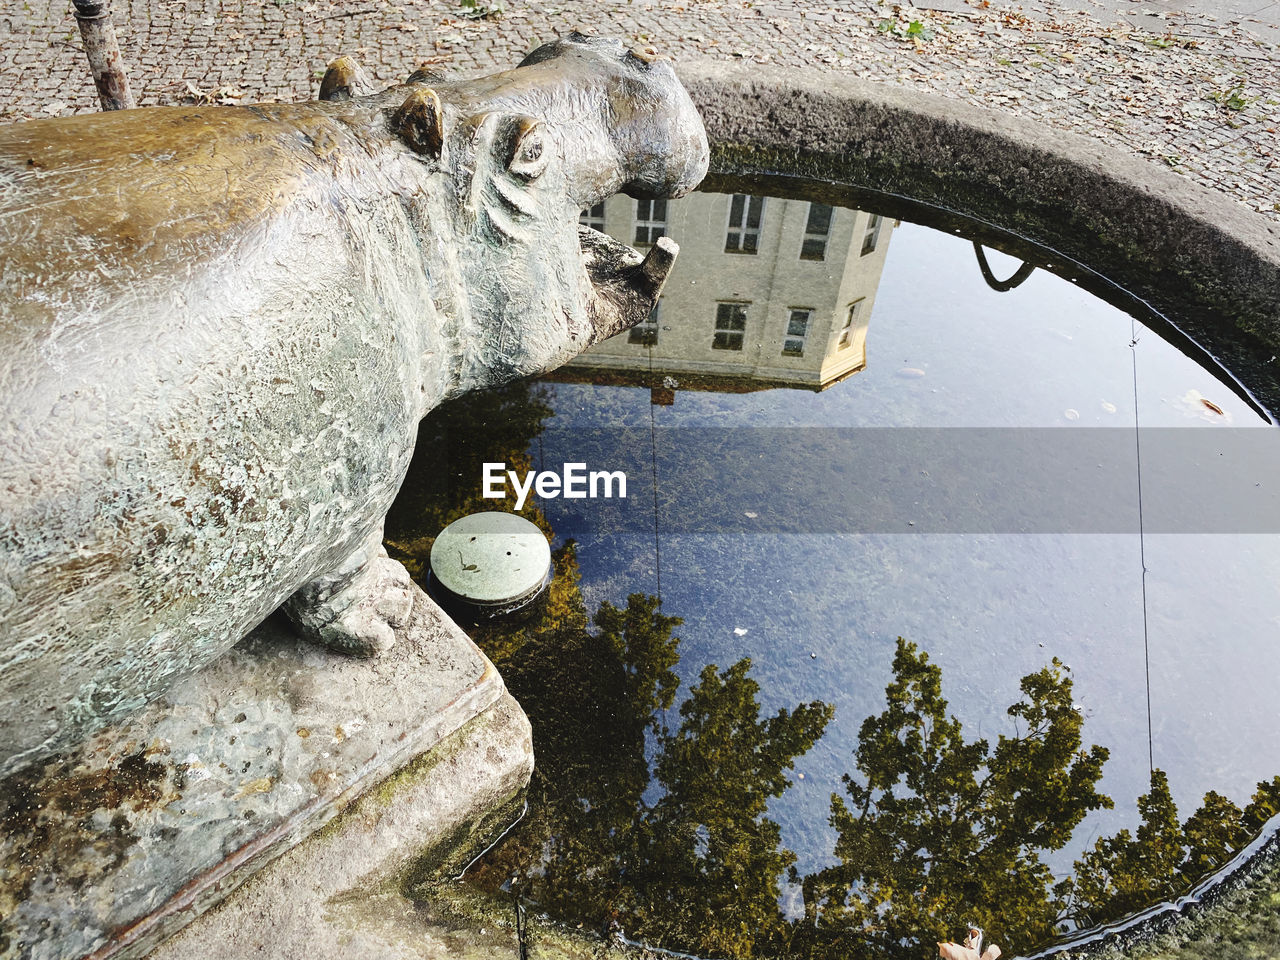 Little fontain with hippo statue reflecting the city